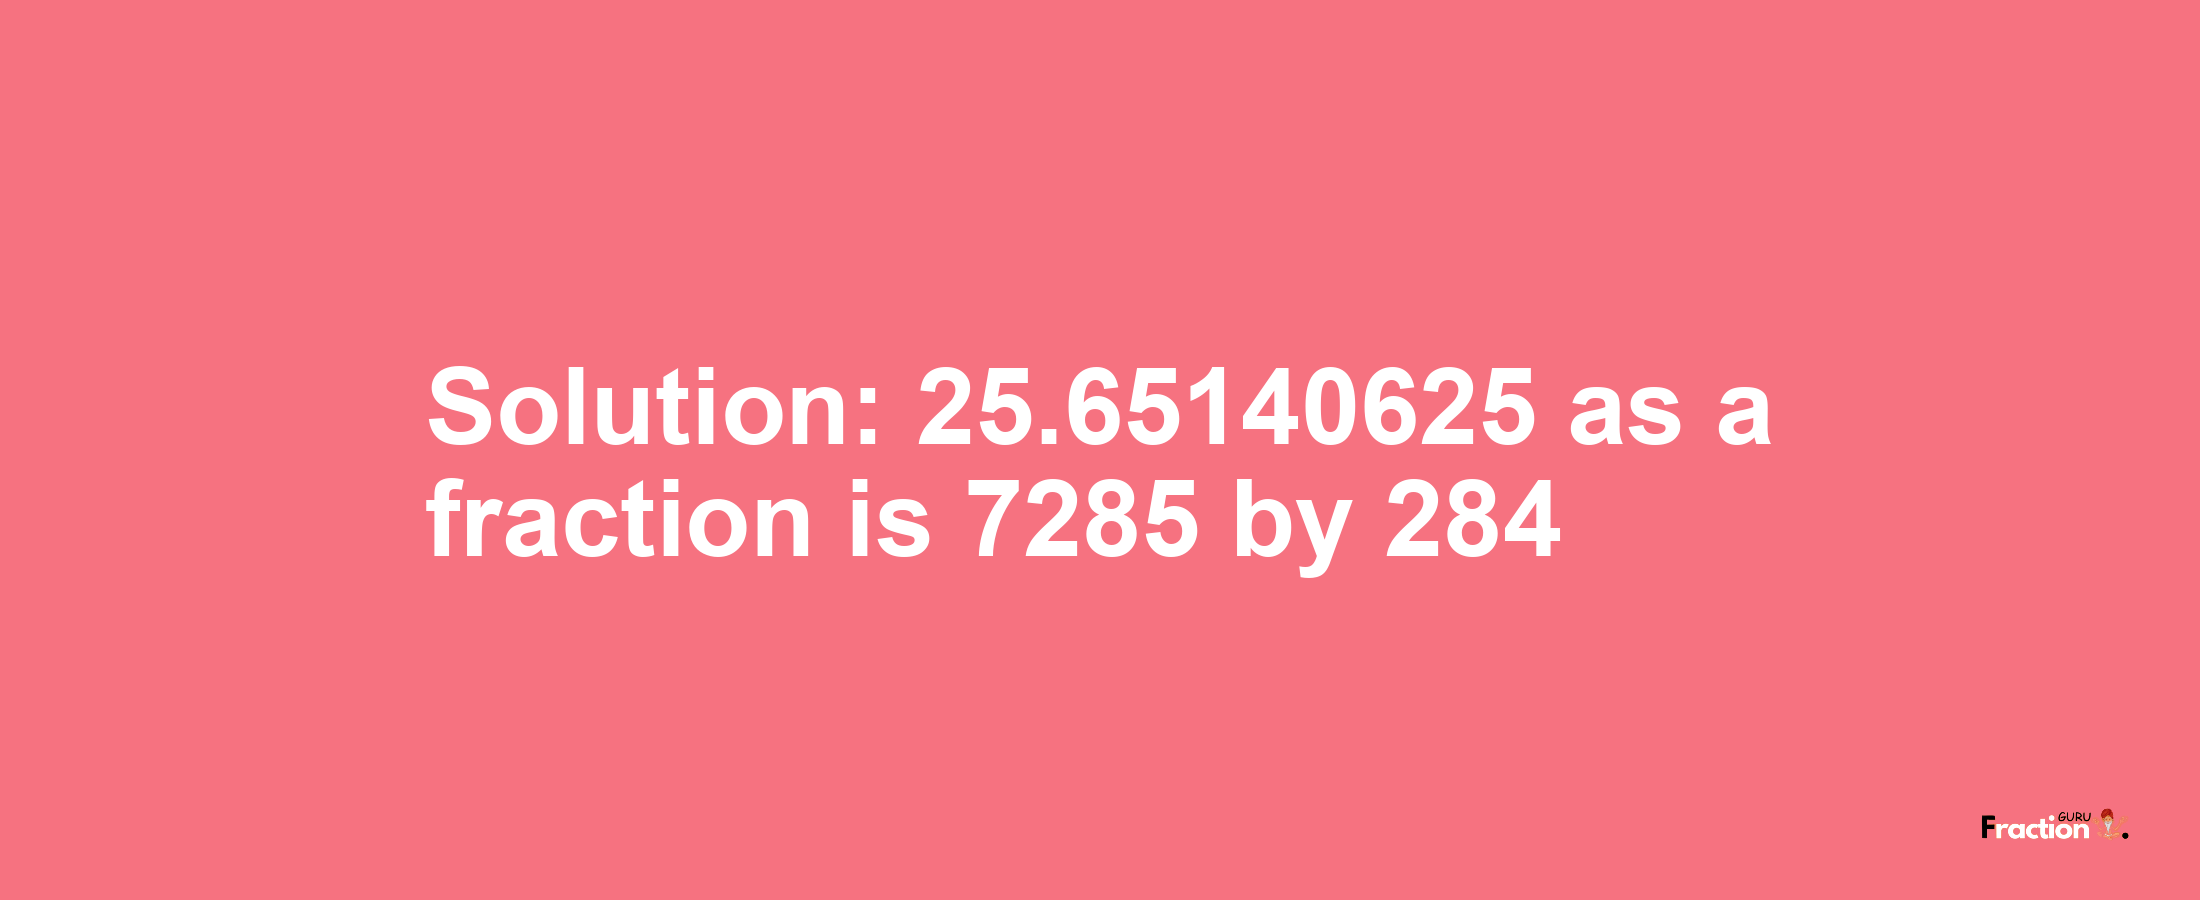 Solution:25.65140625 as a fraction is 7285/284